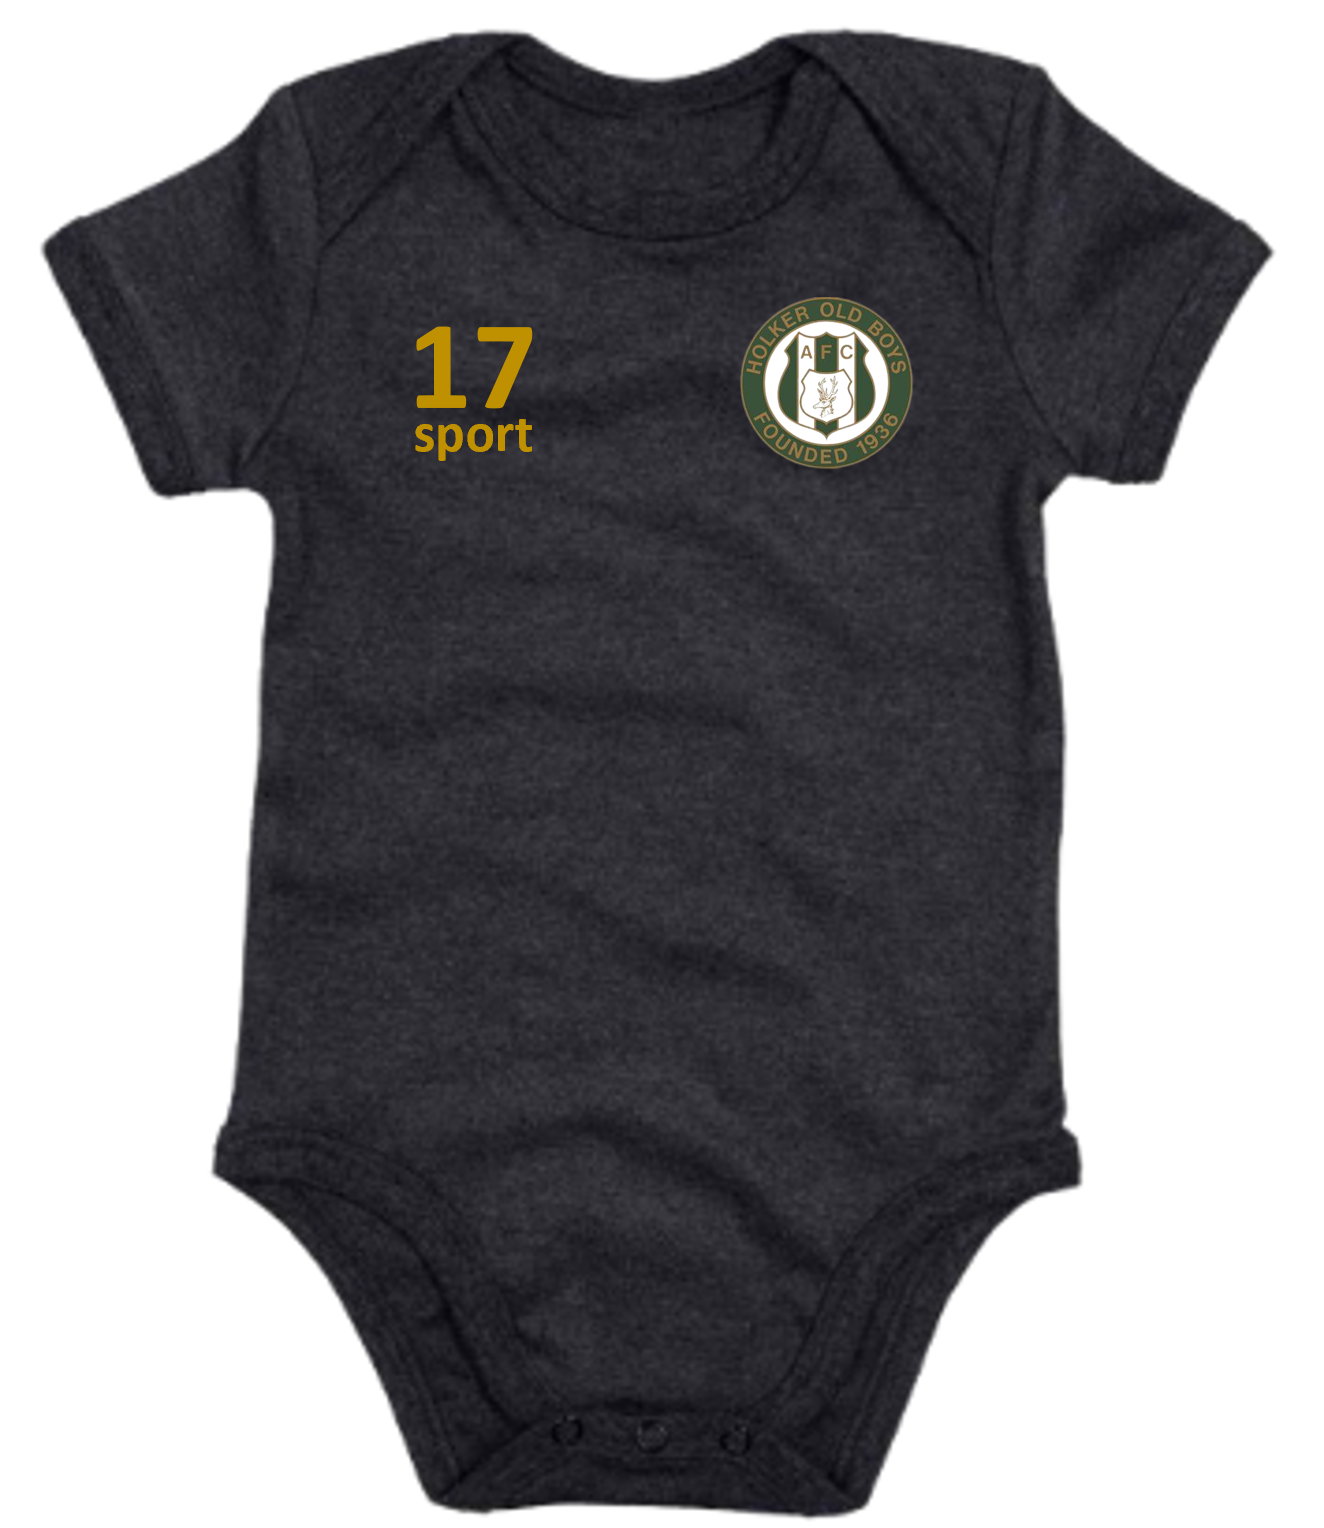 Exclusive Limited Edition Holker Baby Bundle